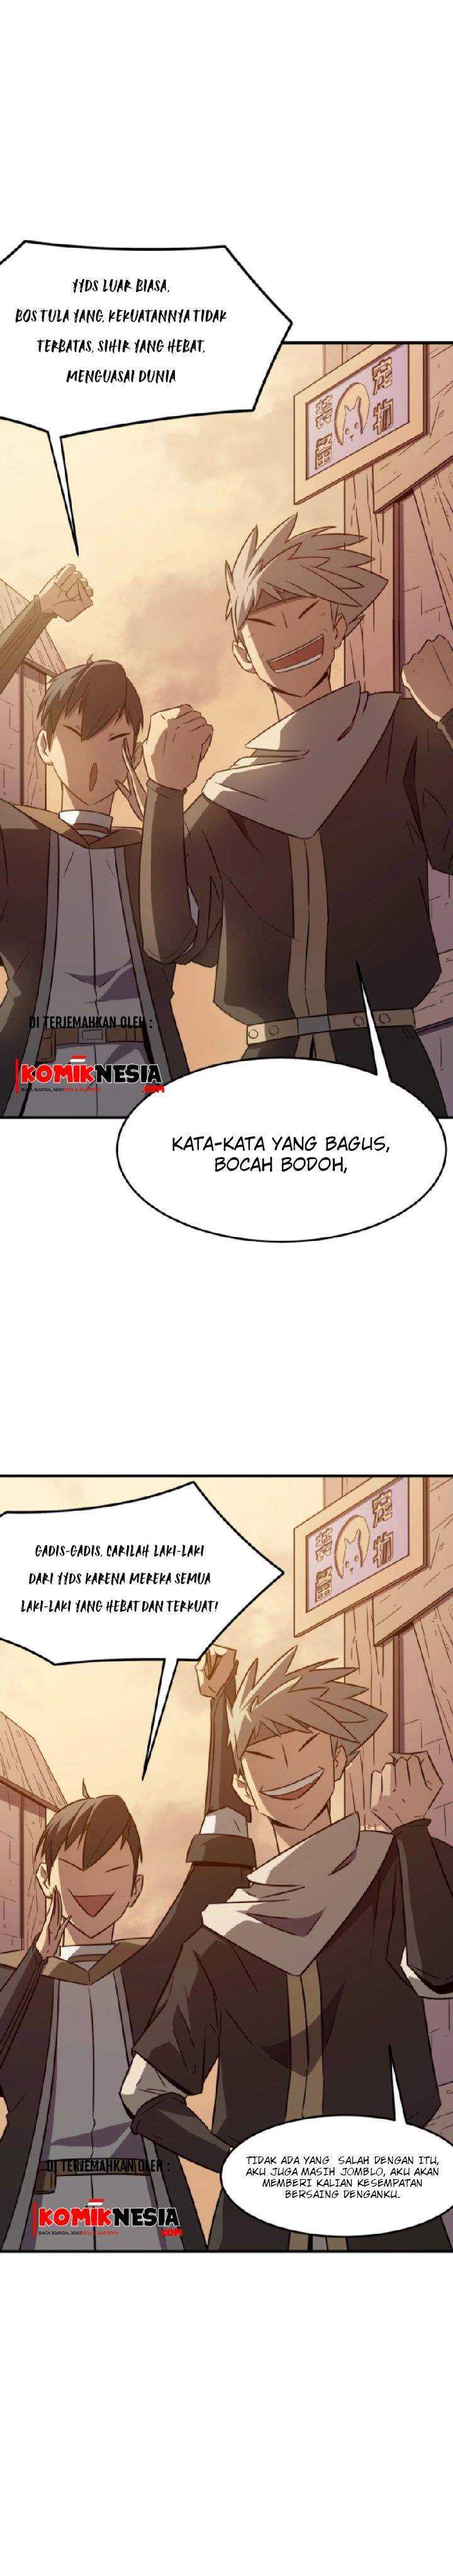 Hero! Watch up! Chapter 04